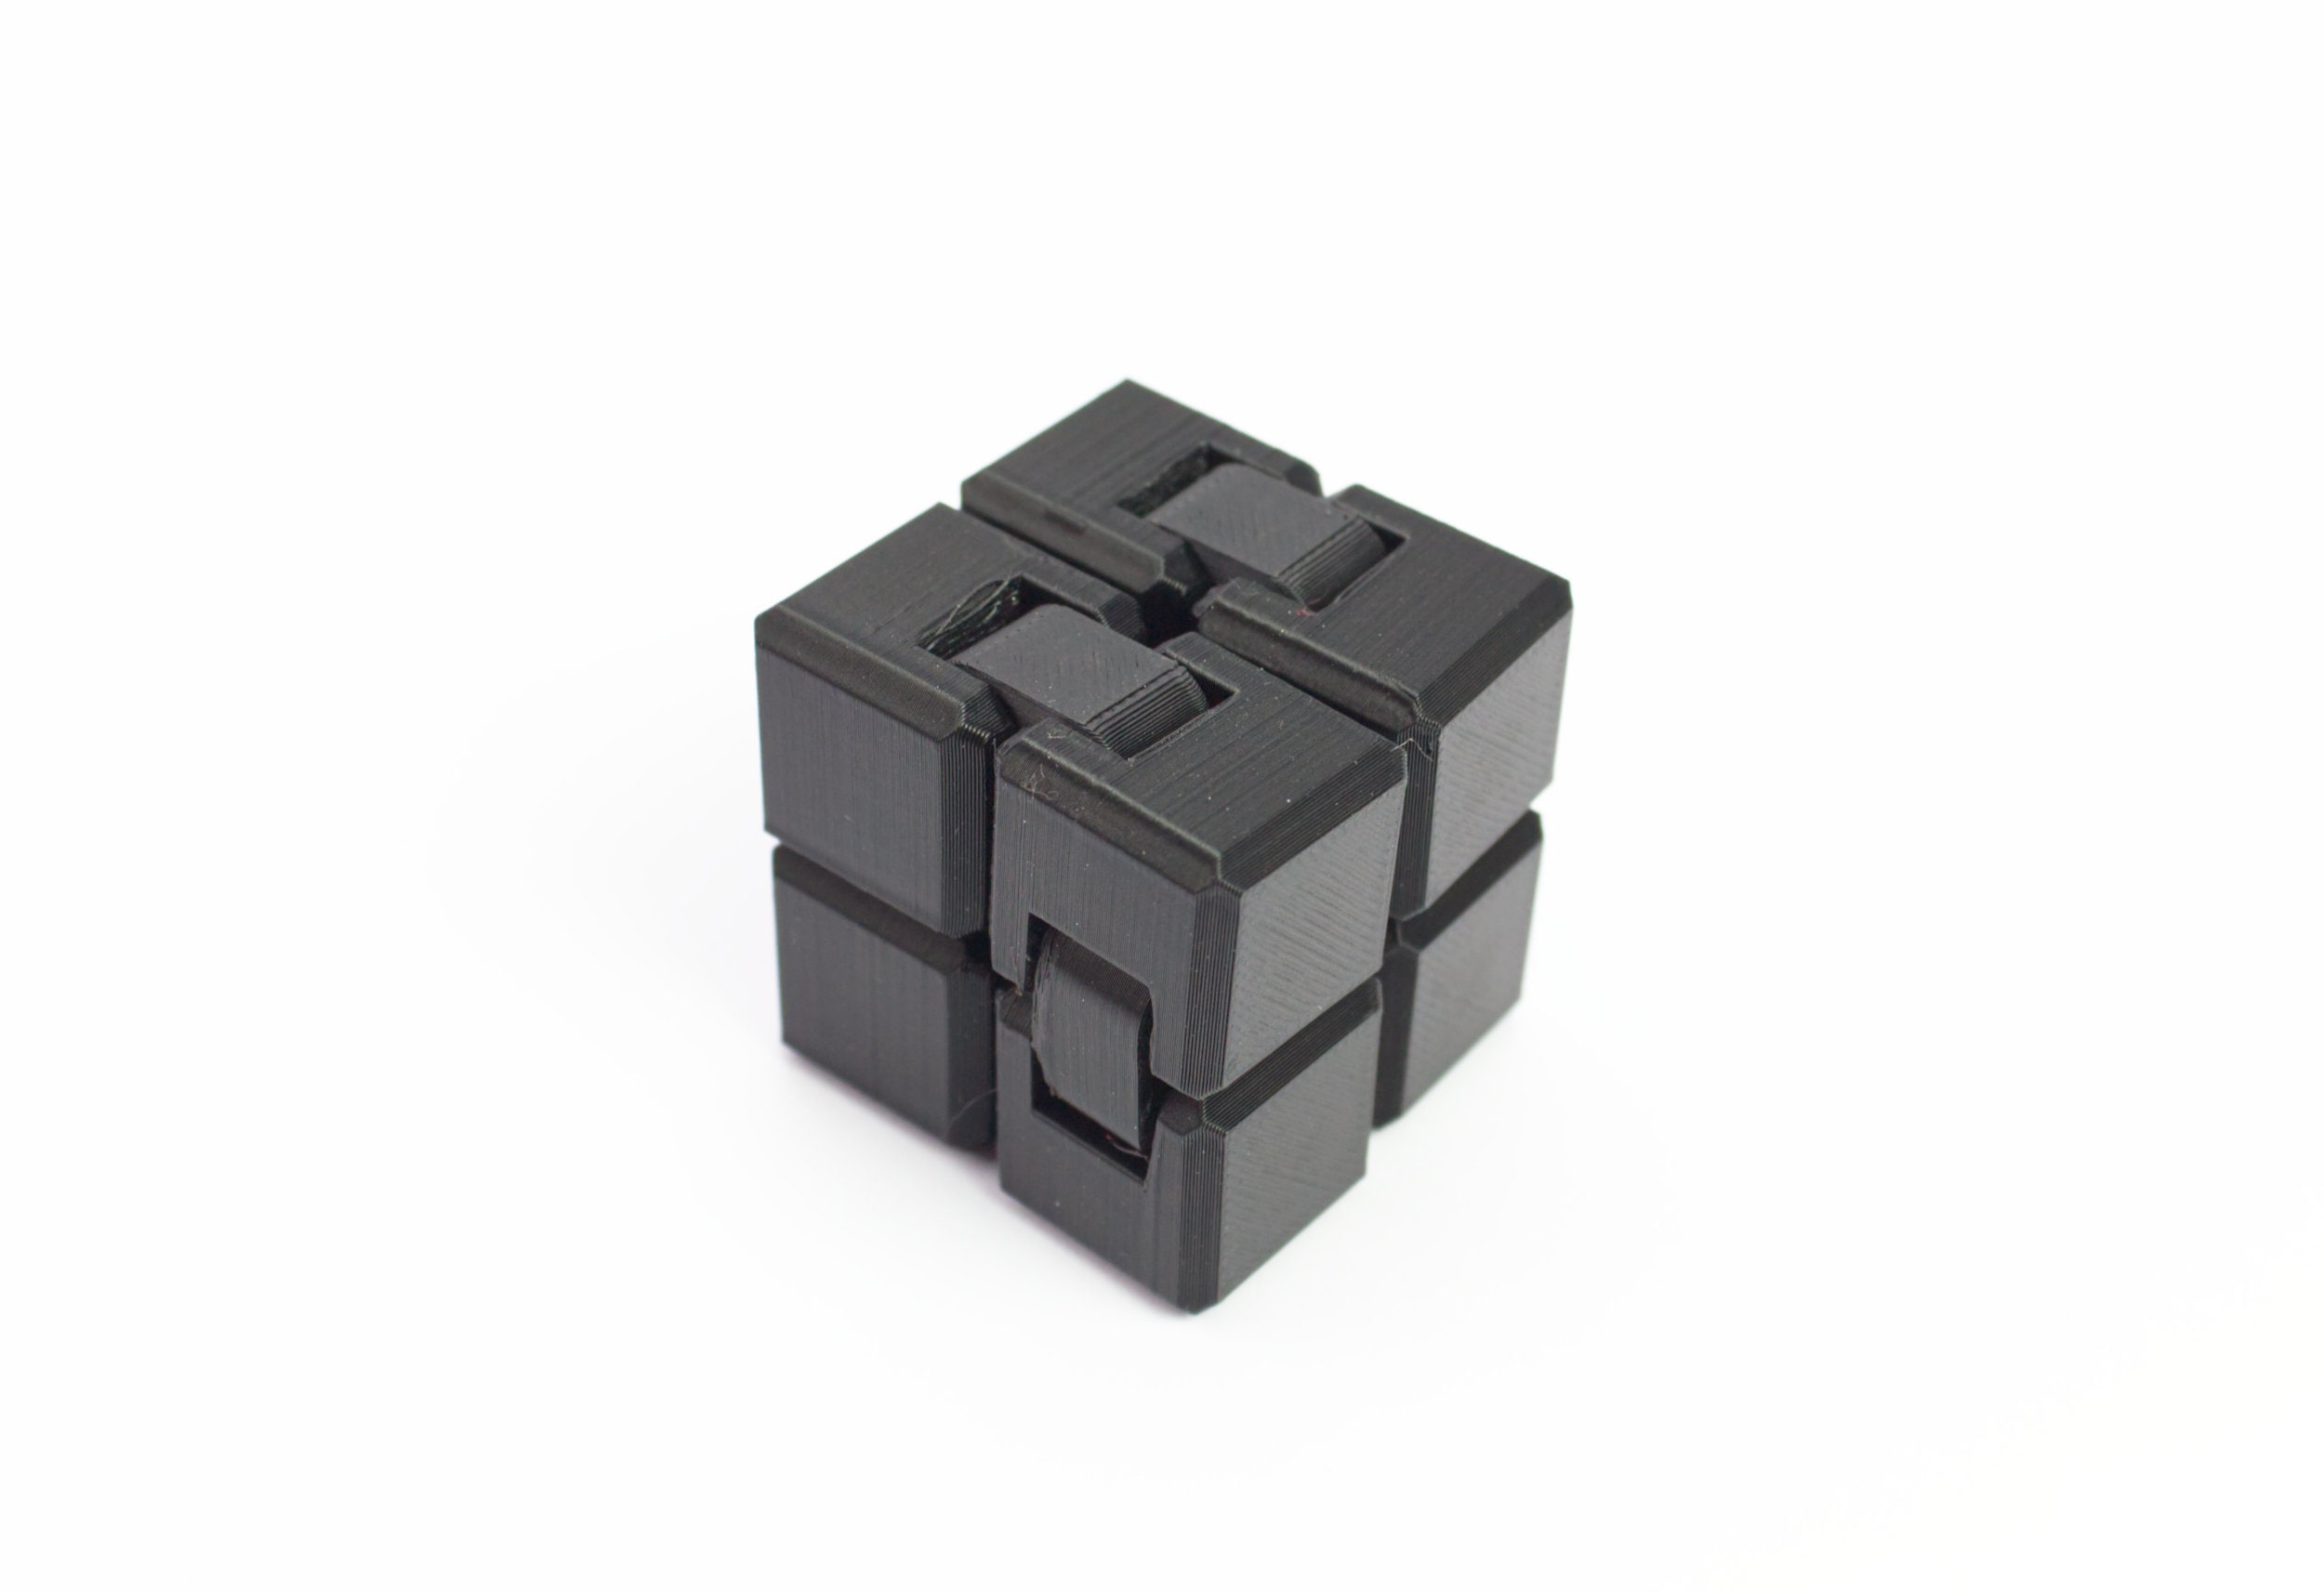 Heavy Infinity Cube - Magic Endless Folding Fidget Toy - Flip Over and